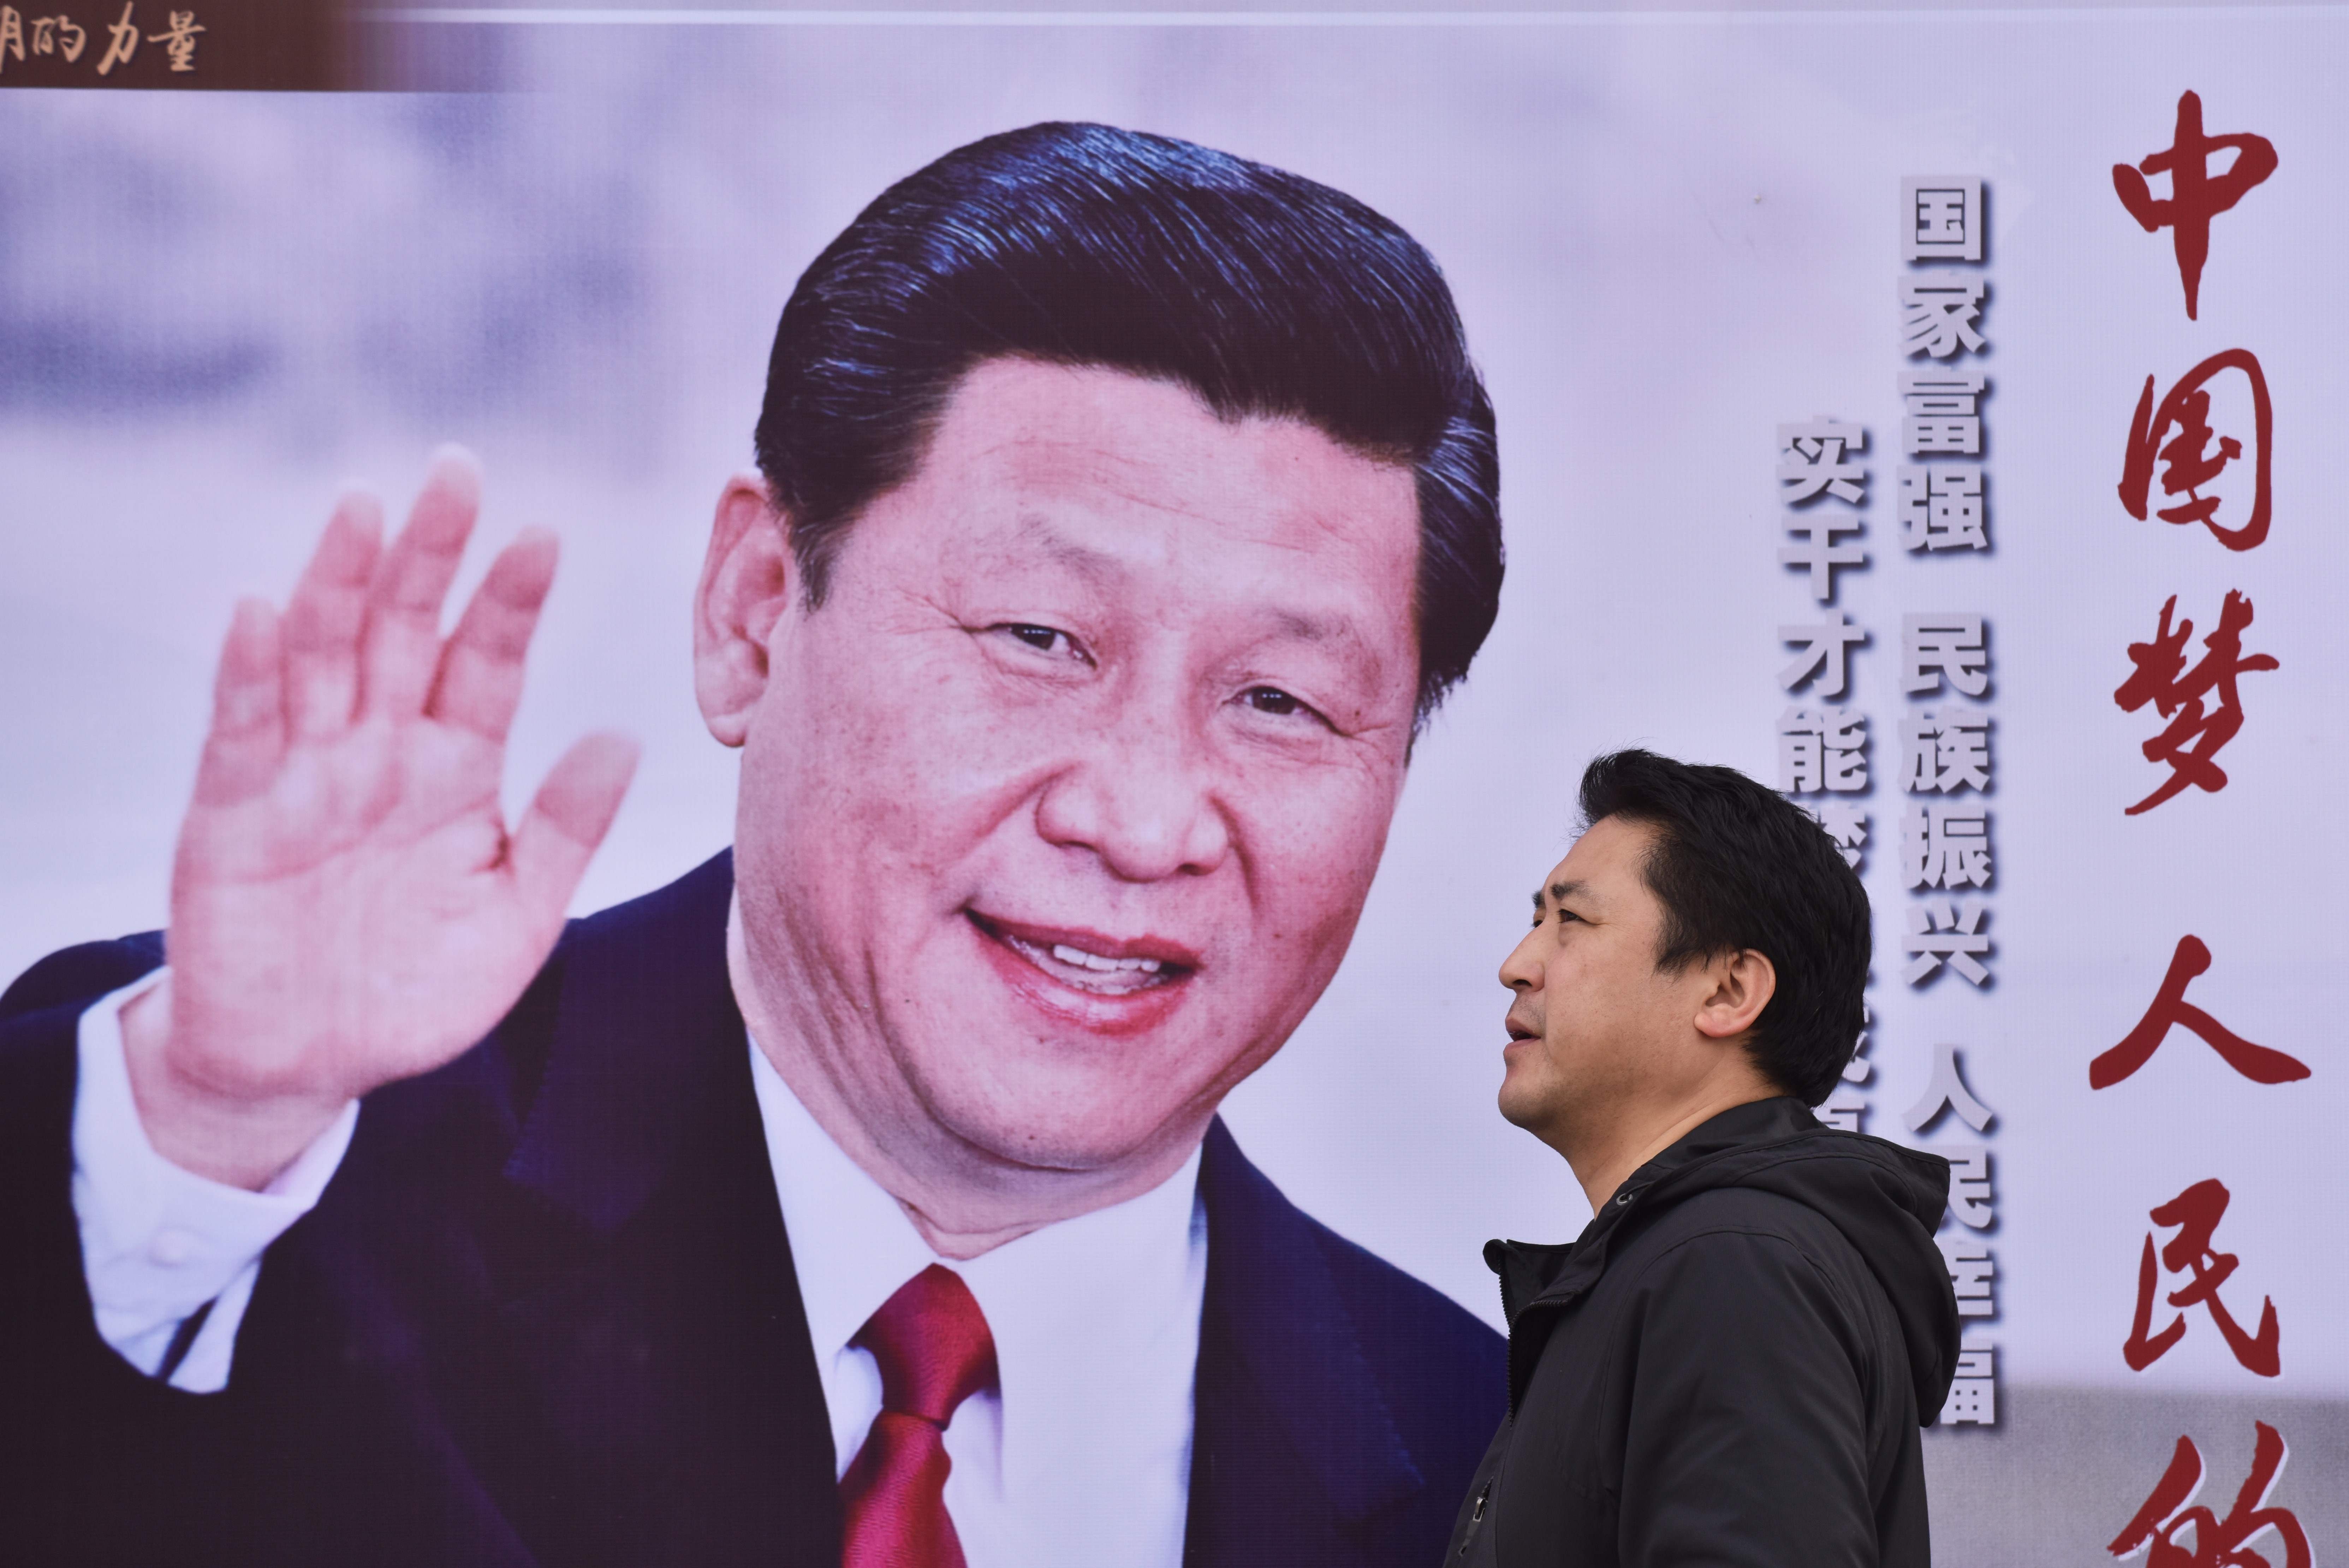 A man walks past a poster of Chinese President Xi Jinping with the slogan “Chinese Dream, People’s Dream” in Beijing on October 16, 2017. Photo: AFP